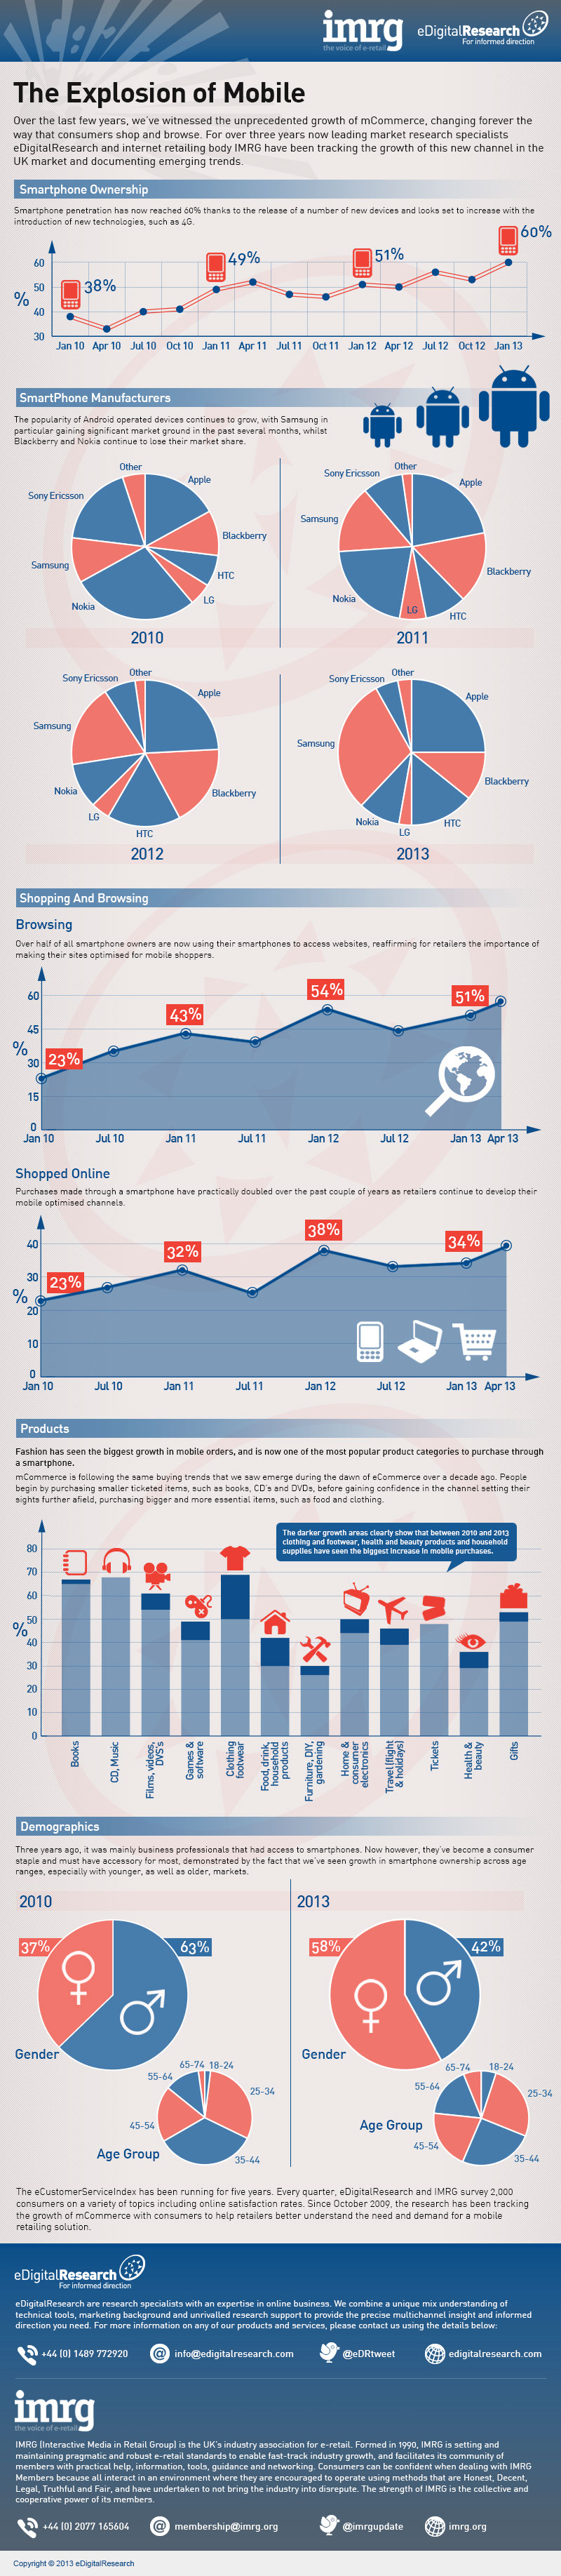 UK Mobile Commerce Growth-Infographic